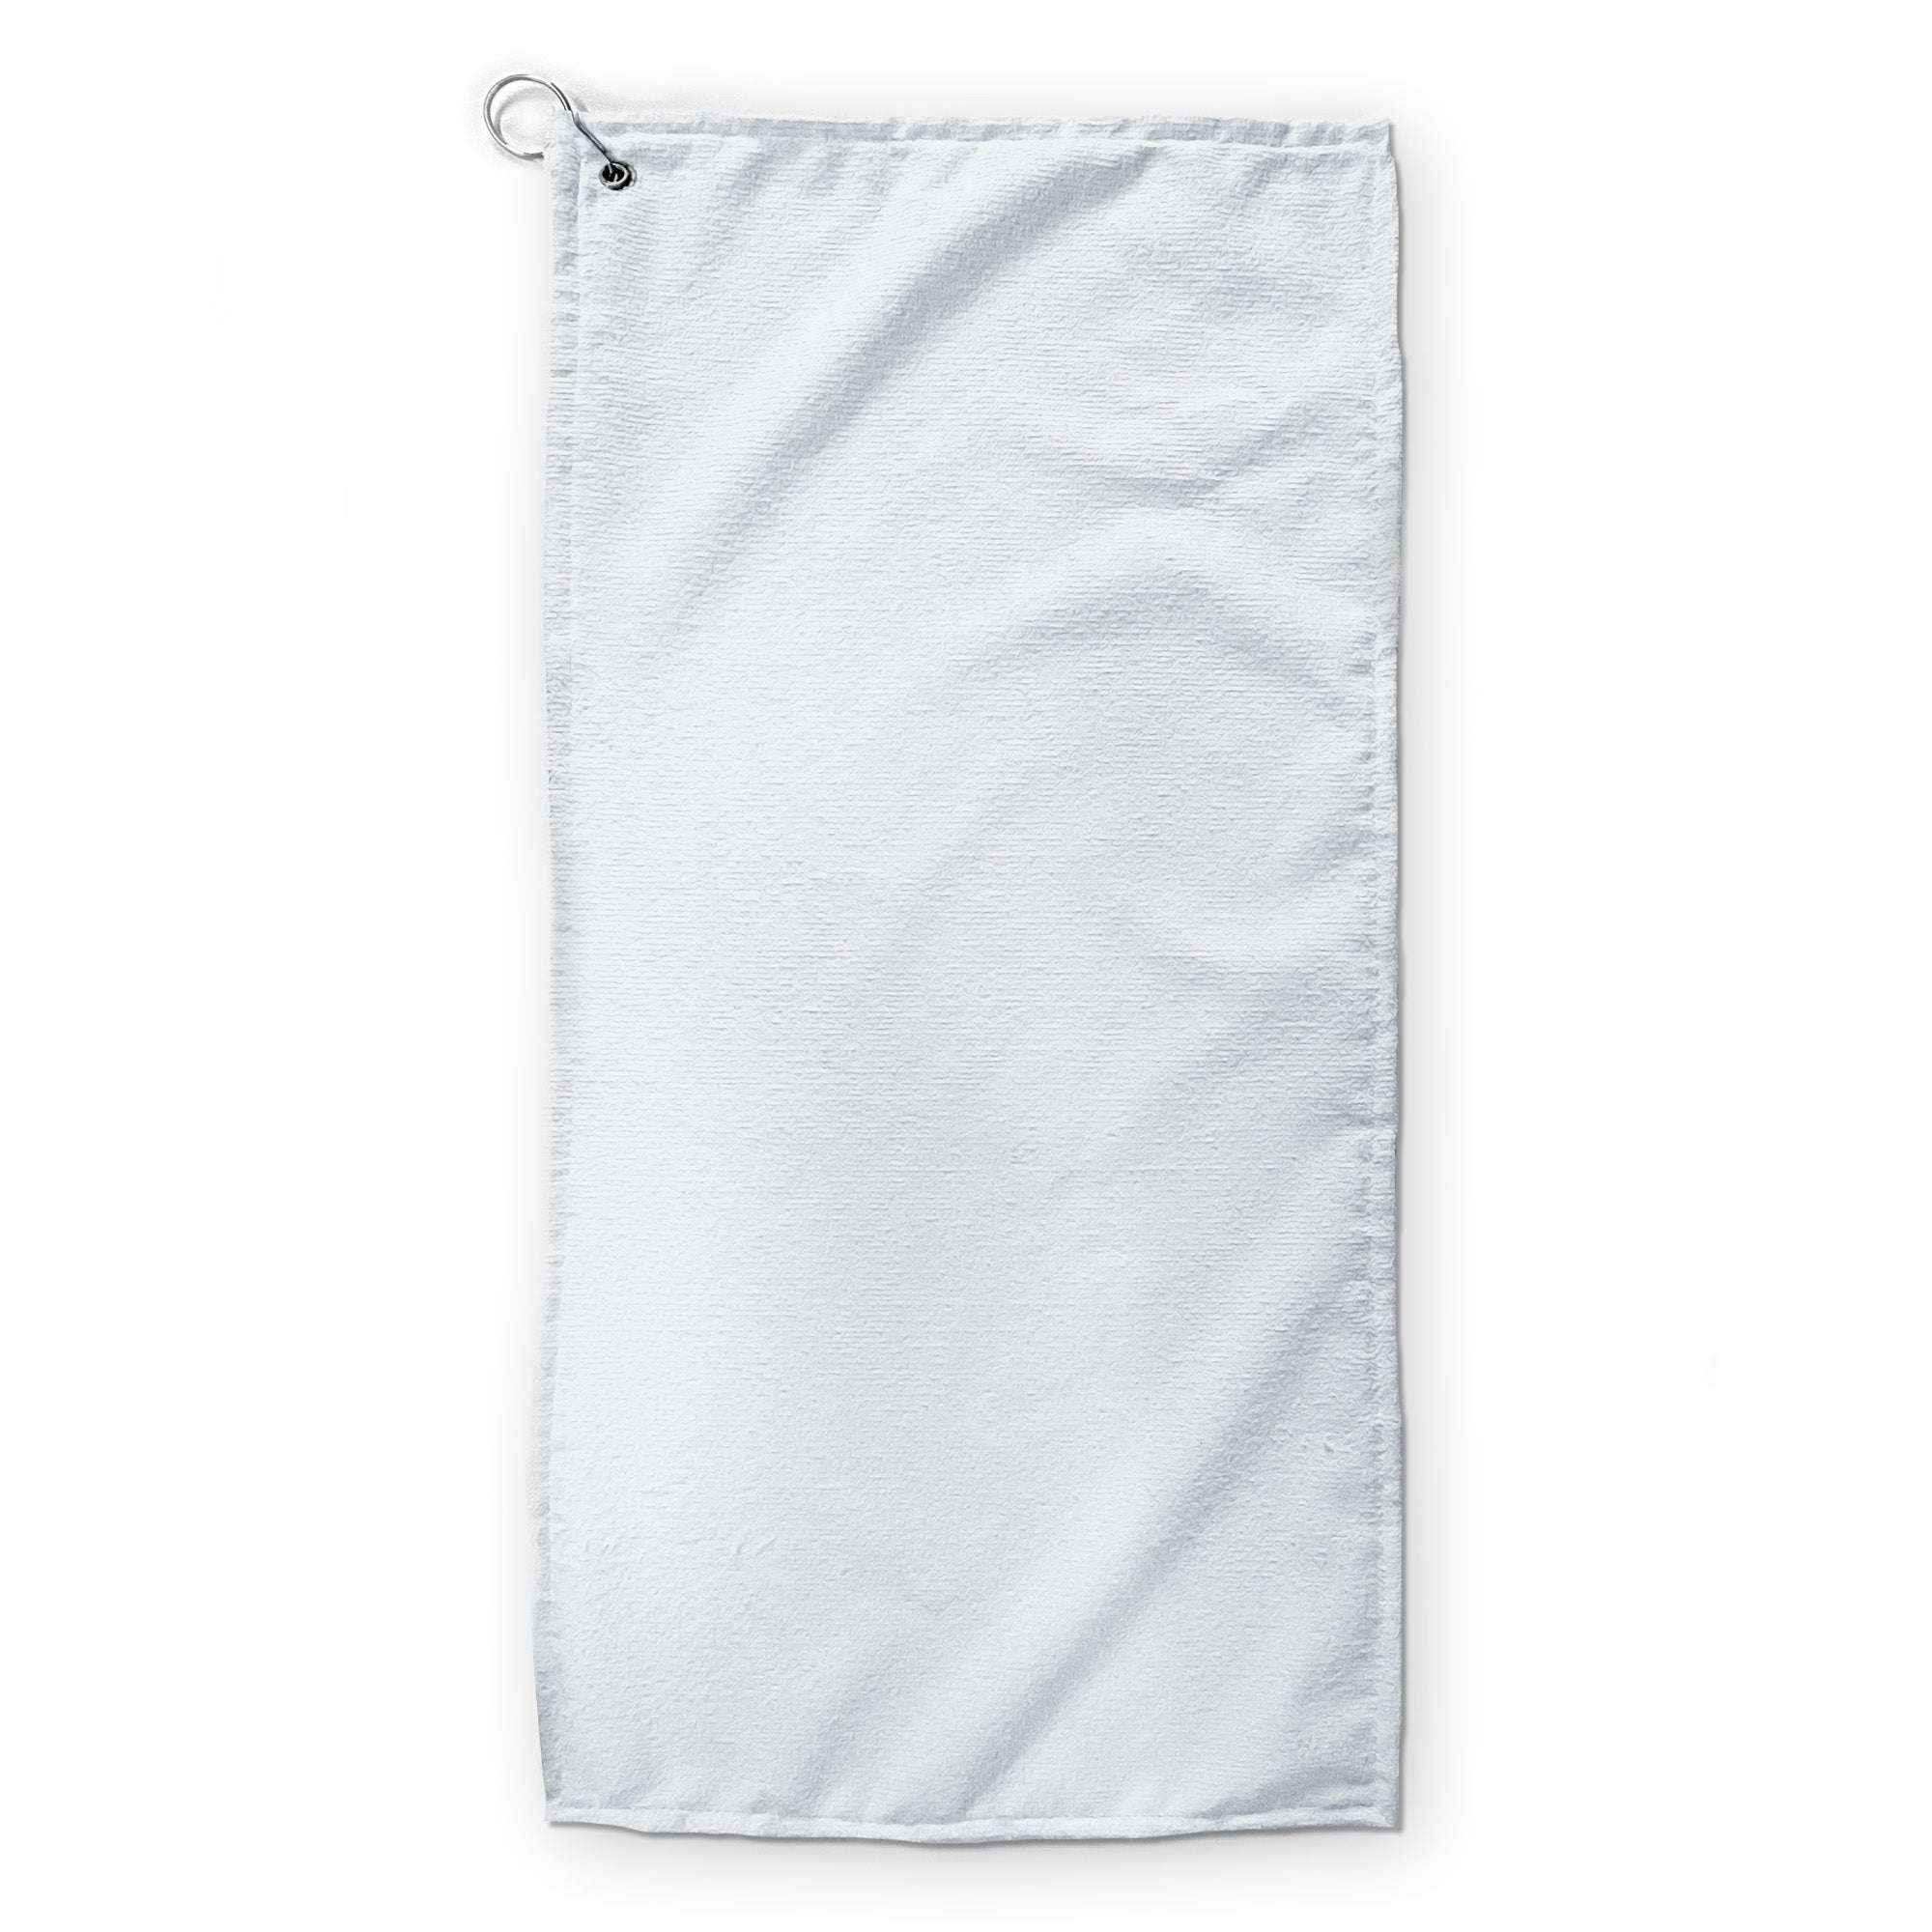 Blank Golf Towels For Designing | Gift Dropshipping UK